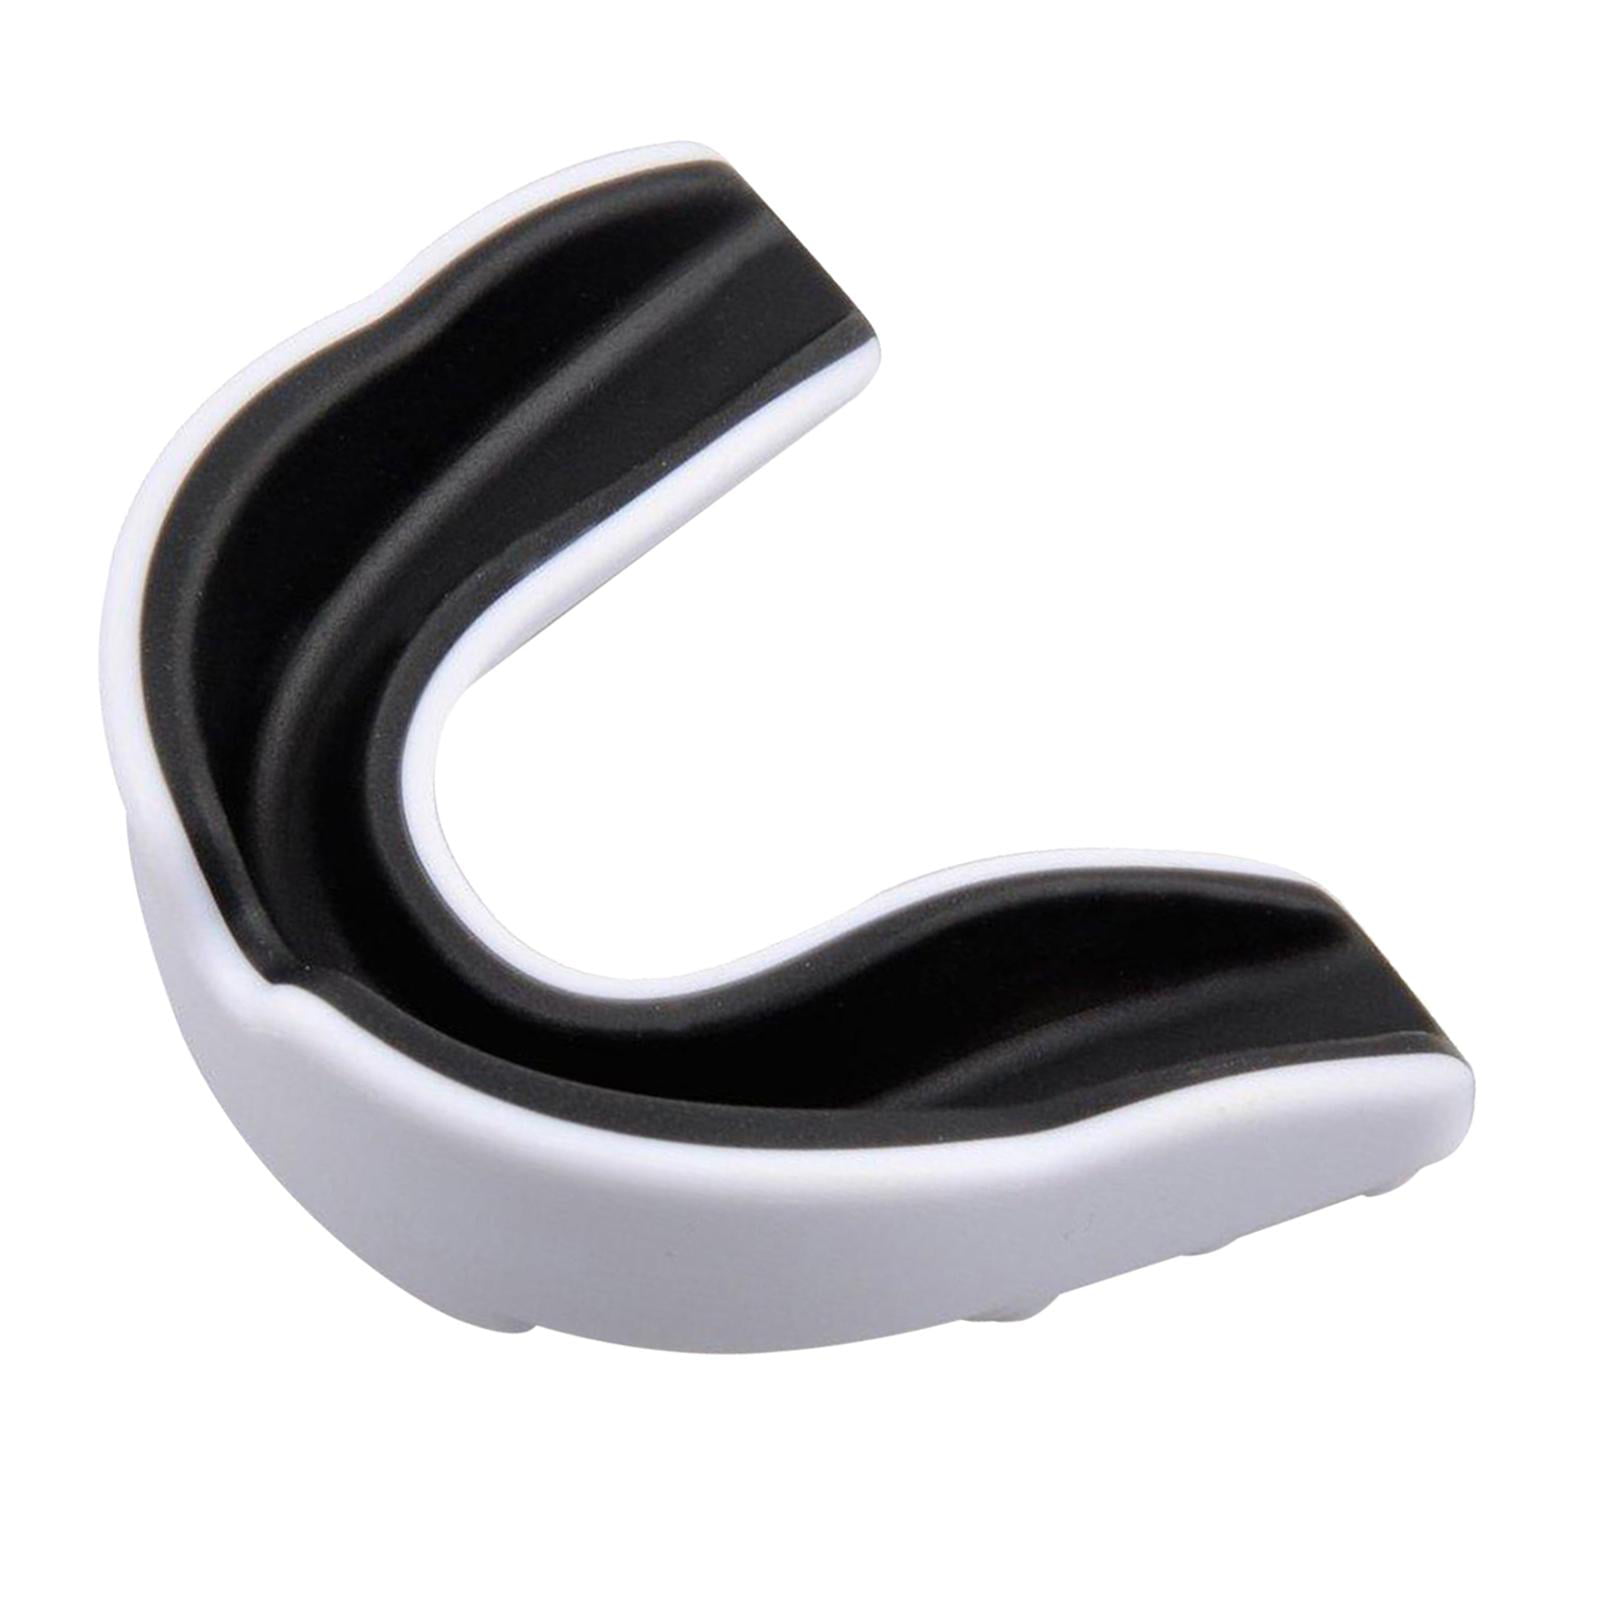 Vega Mouth Guard Mouth Piece Gum Shield for boxing muaythai rugby ice hockey 